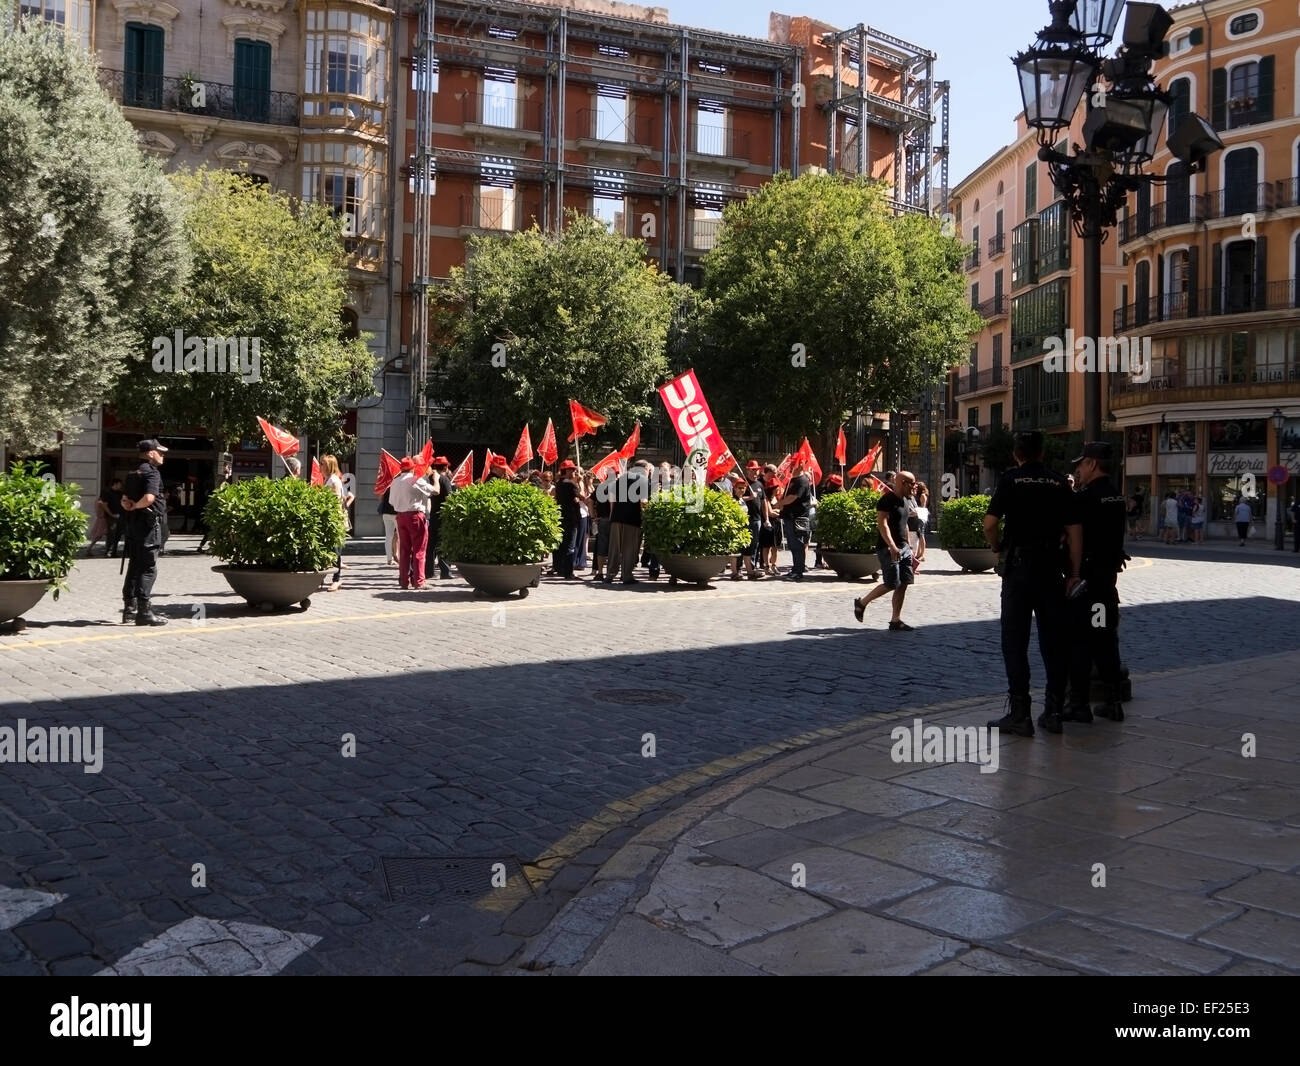 People protesting in Palma Spain. Stock Photo